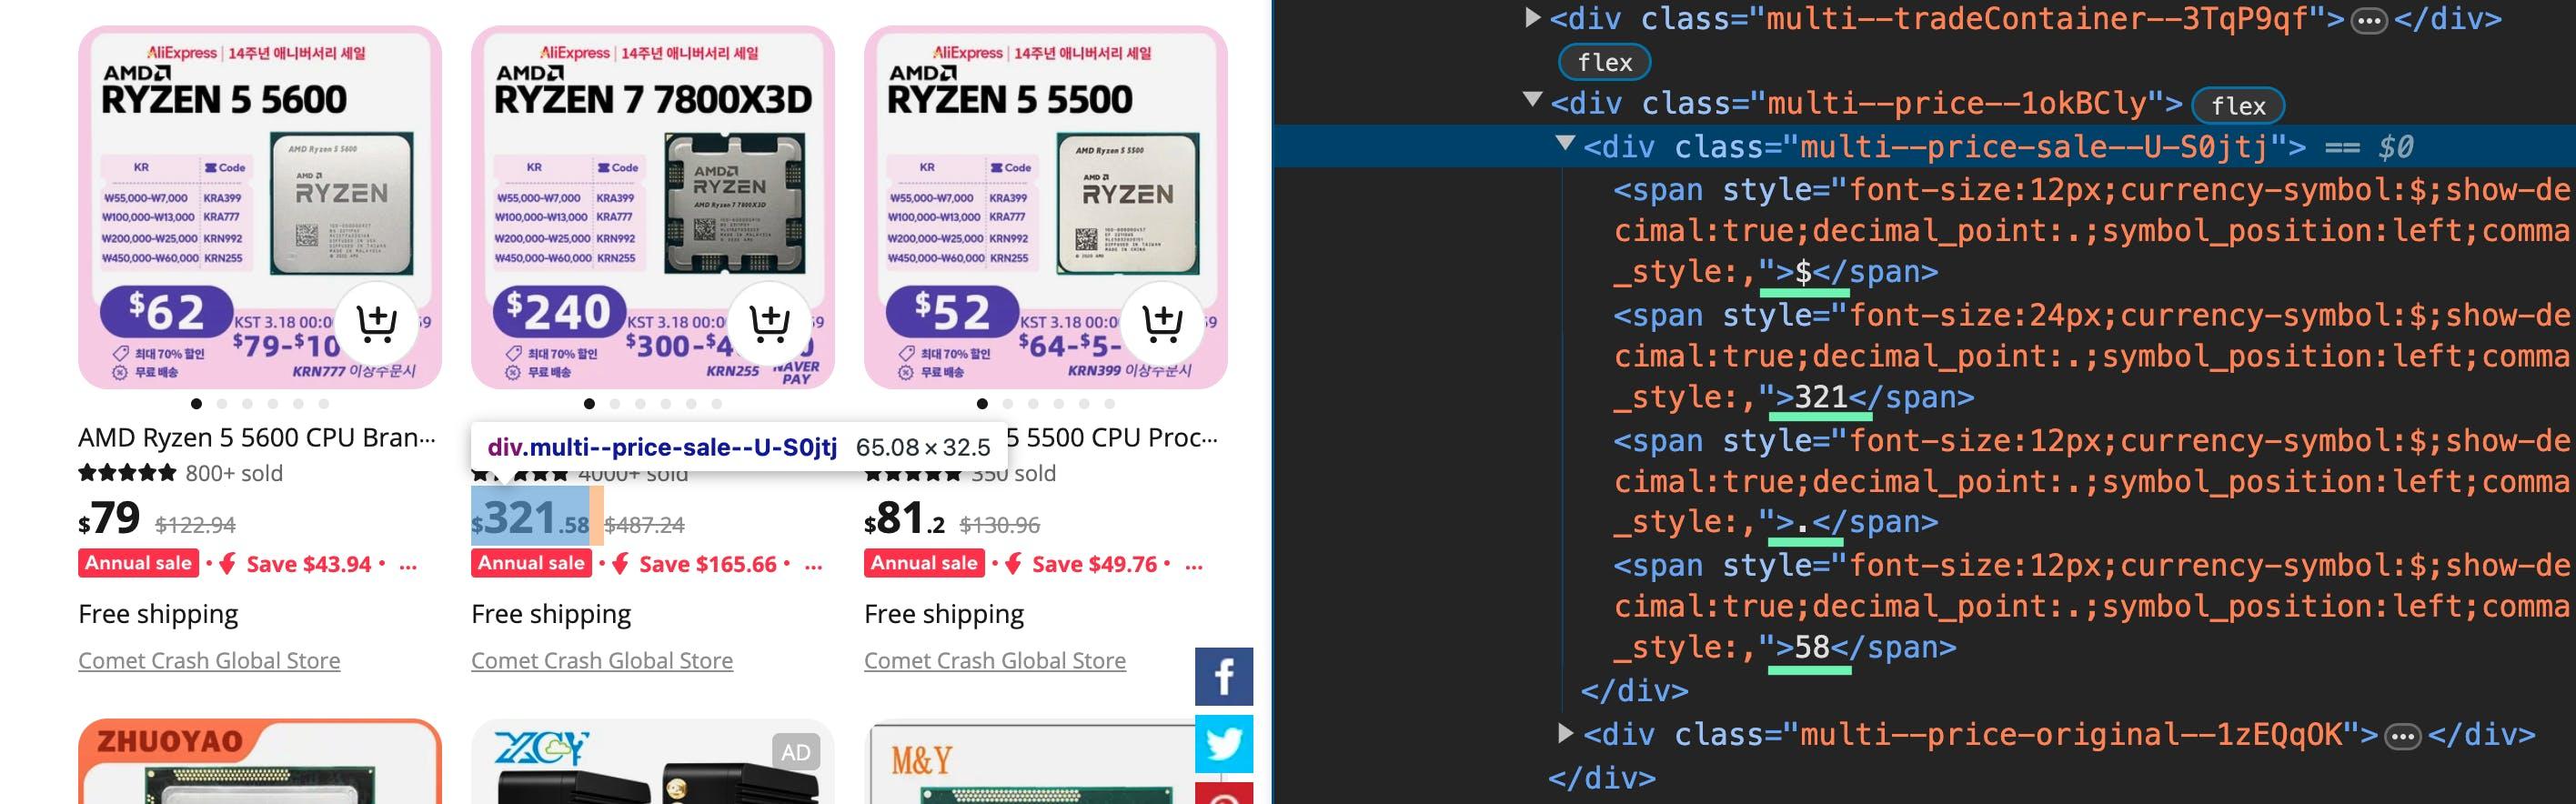 Finding the current price via Developer Tools